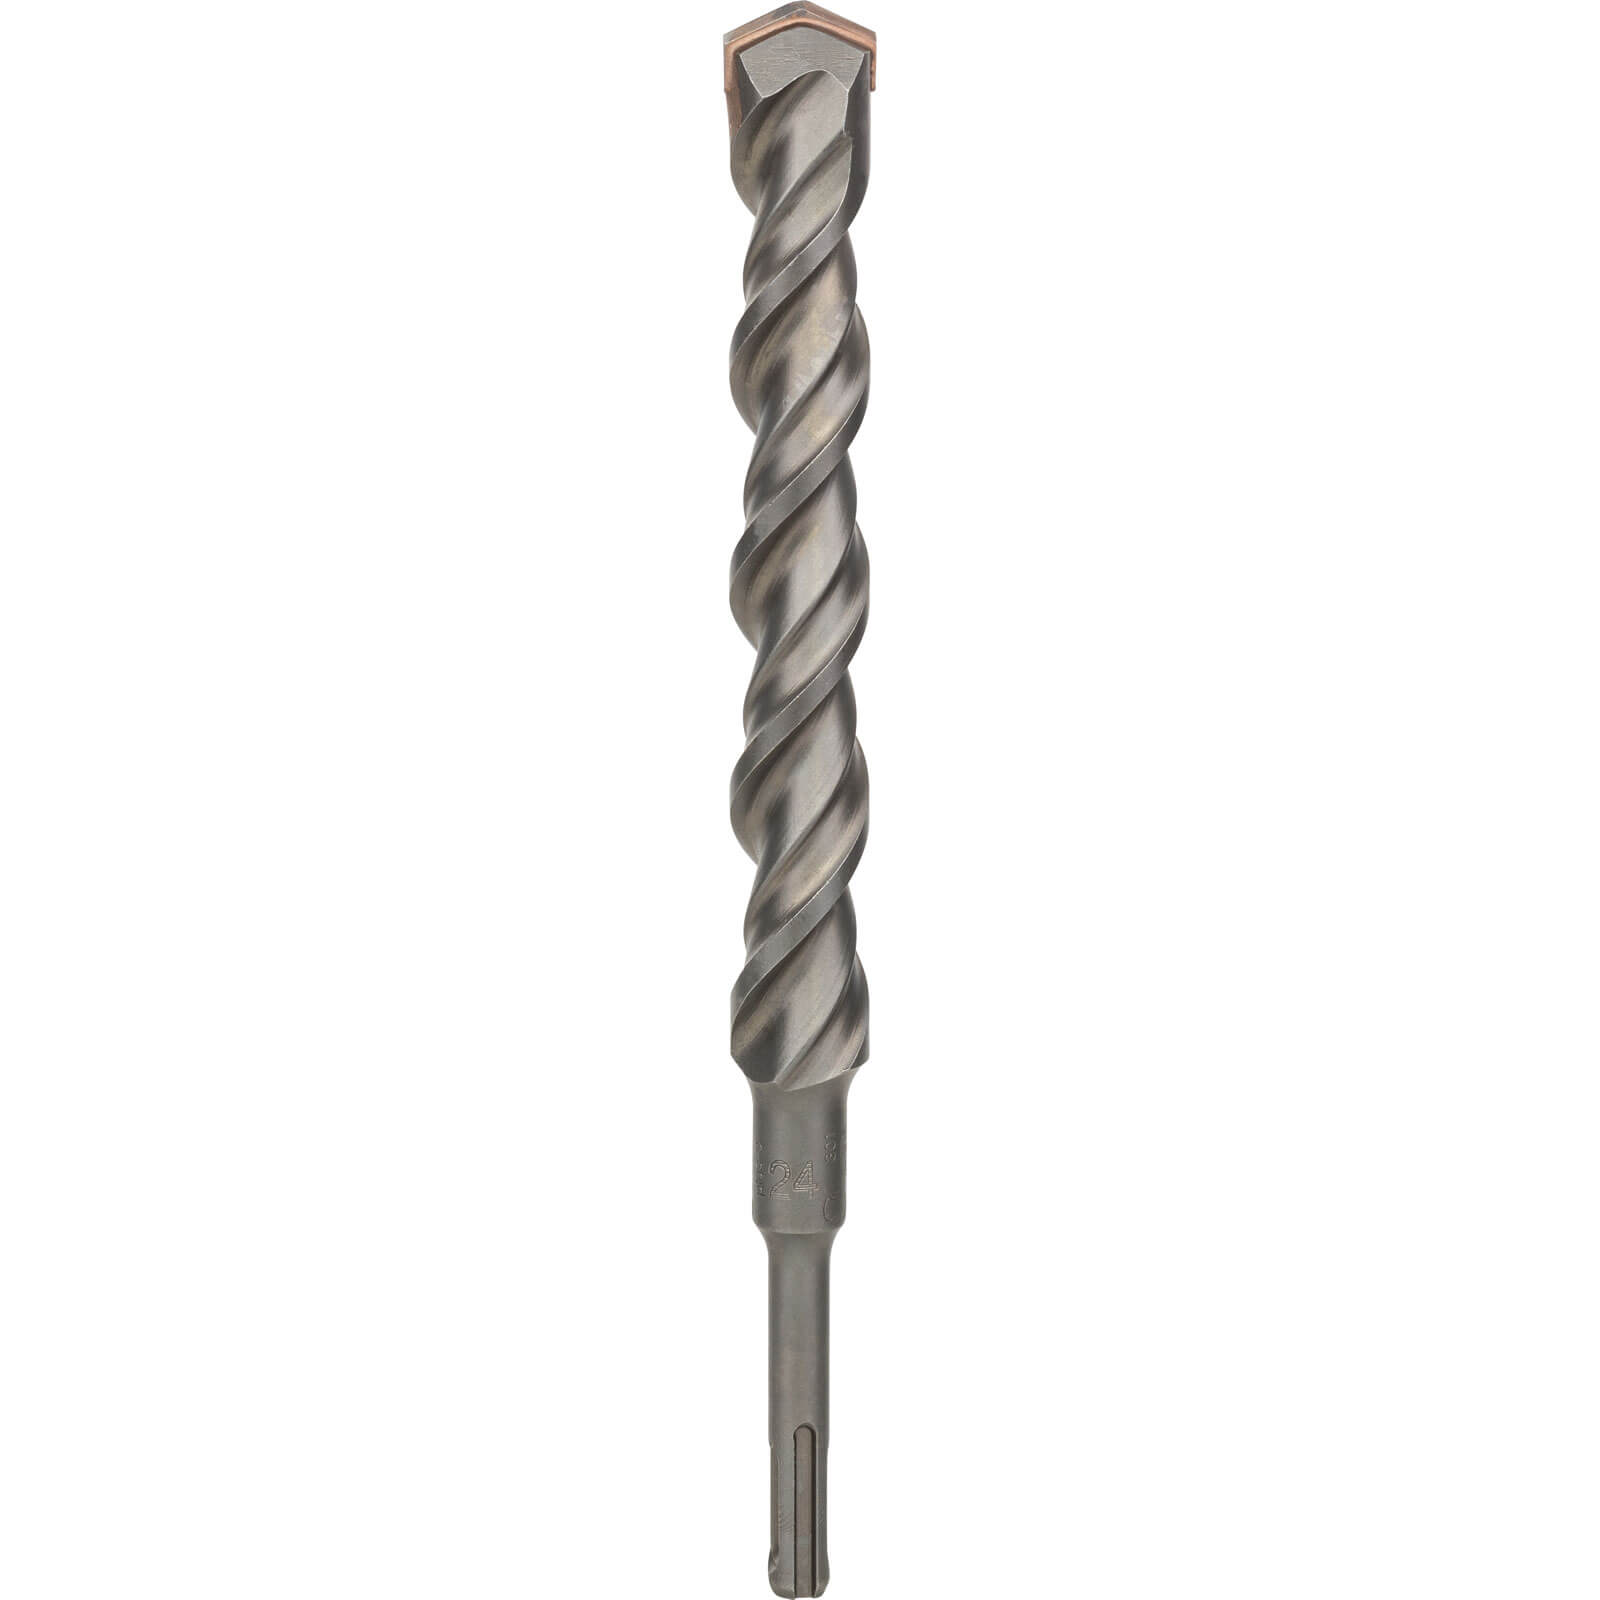 Image of Bosch Series 3 SDS Plus Masonry Drill Bit 24mm 250mm Pack of 1